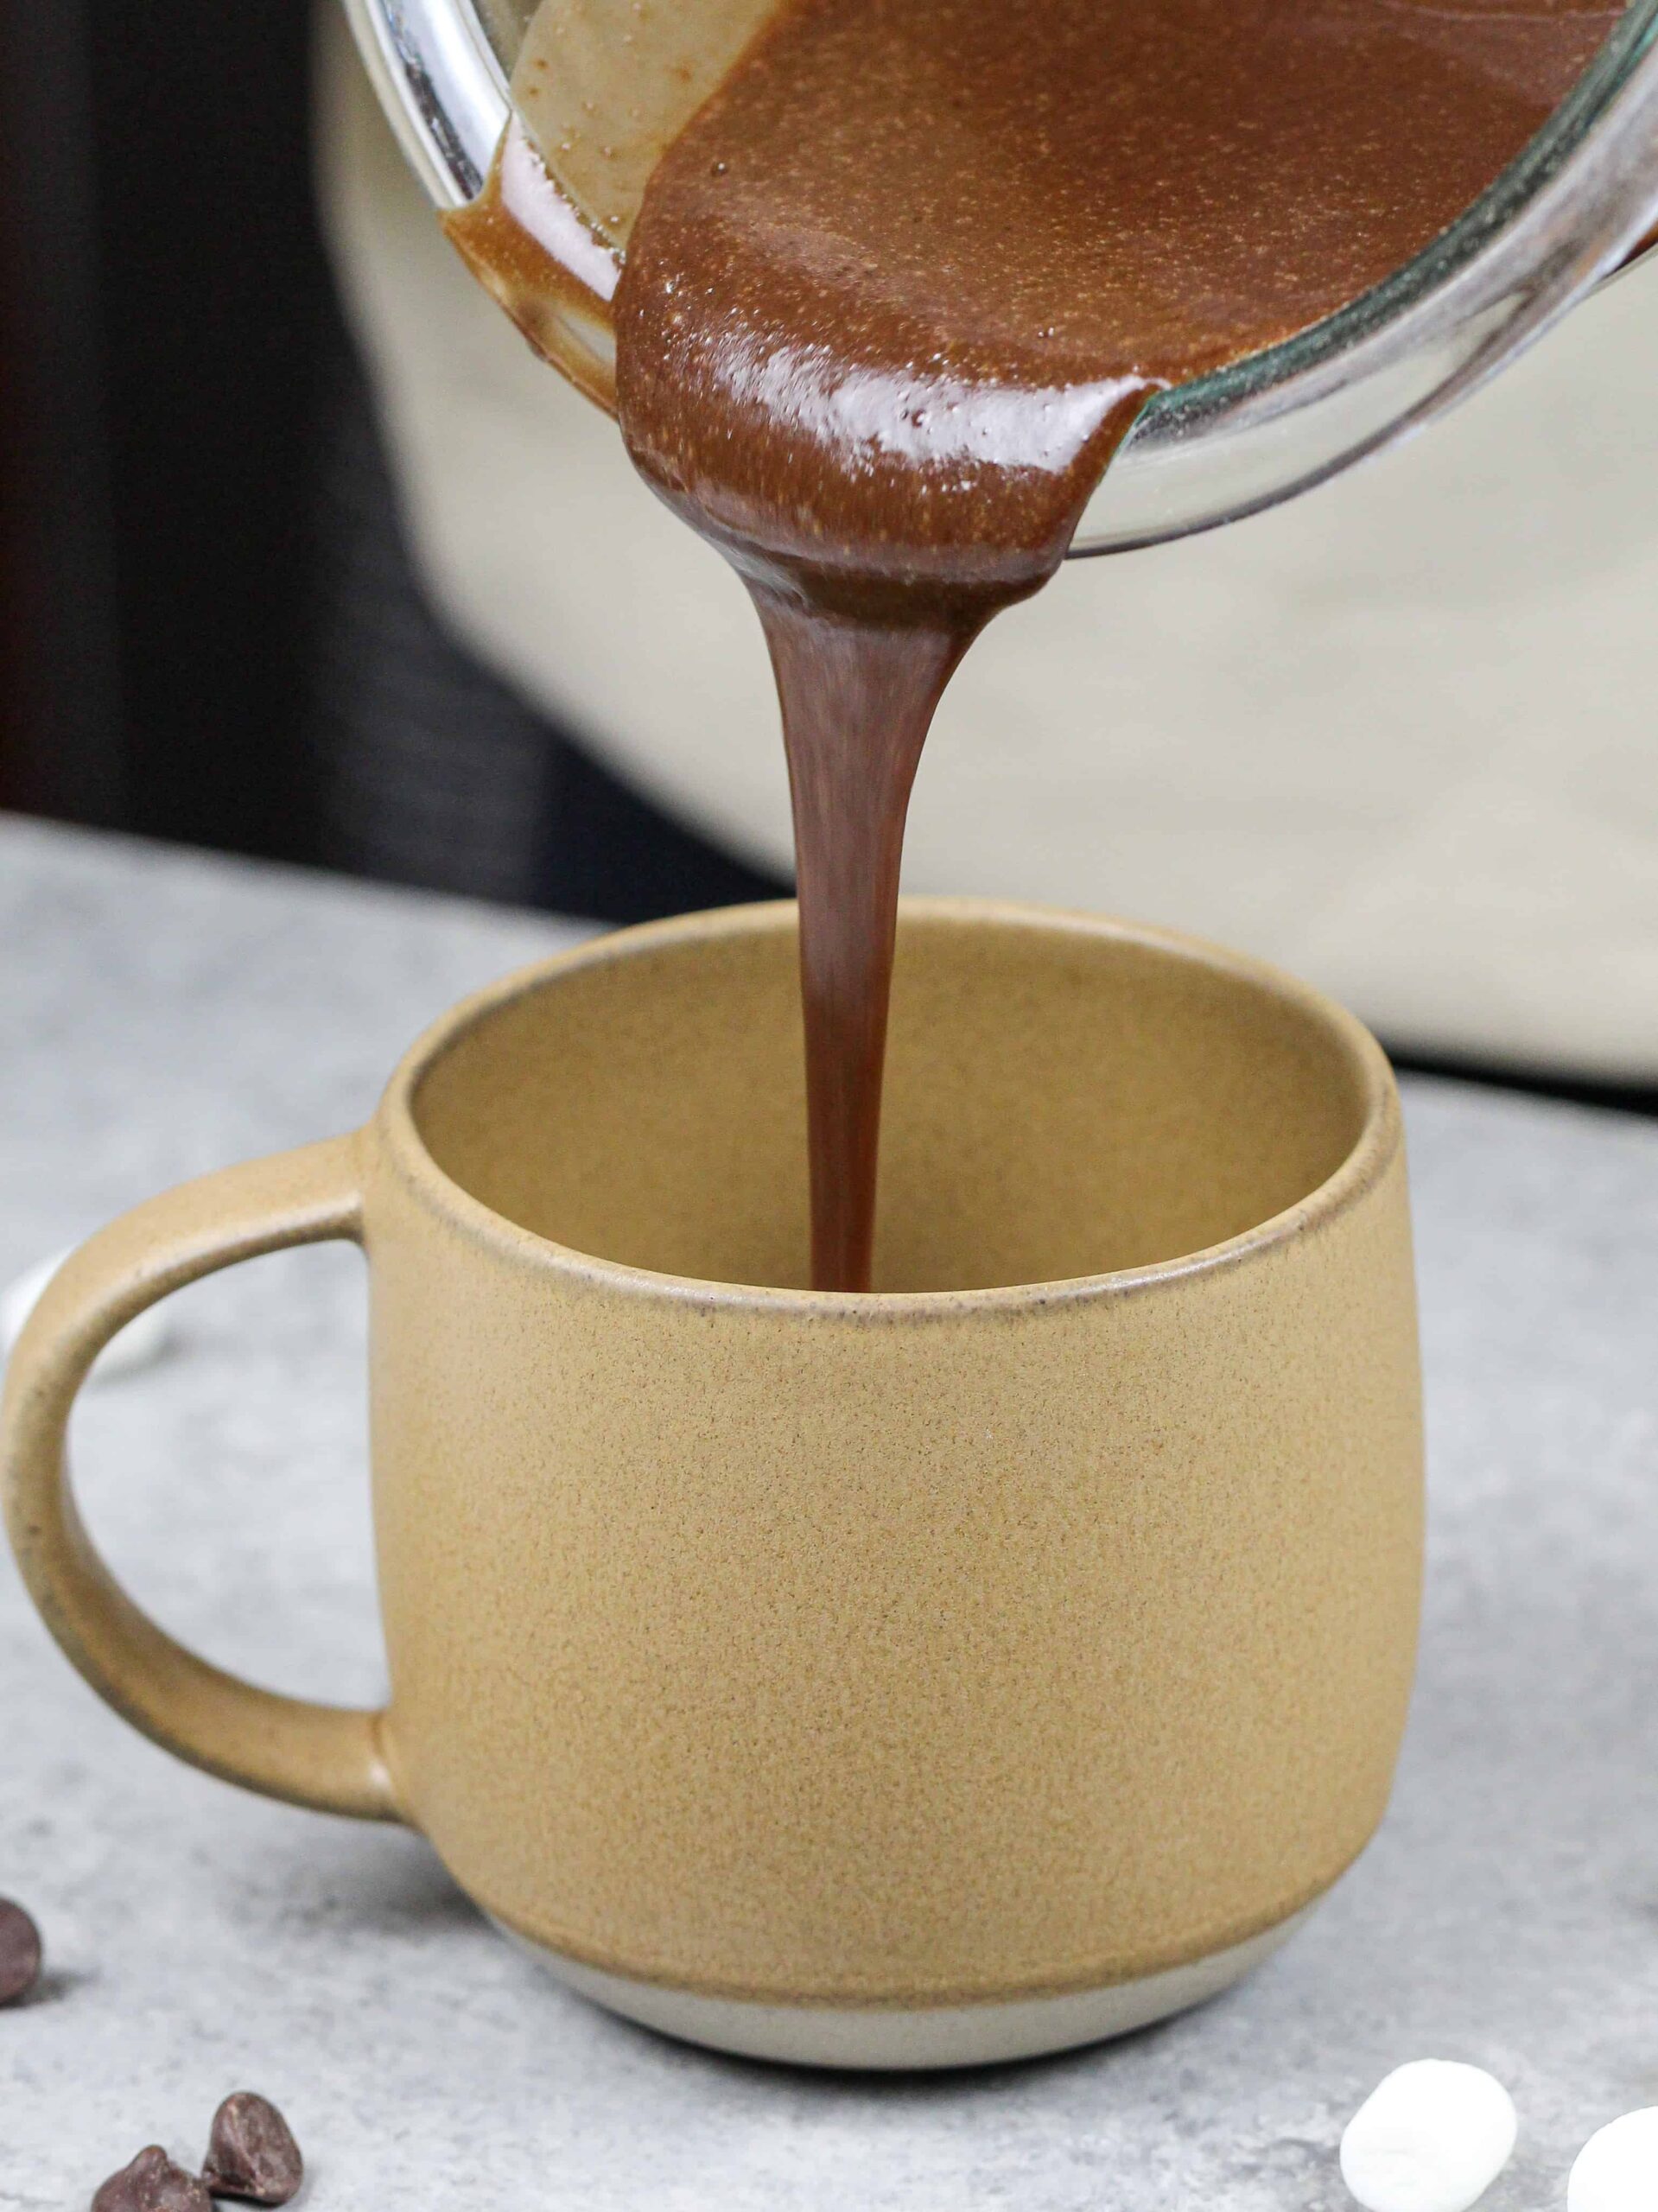 image of chocolate cake batter being poured into a mug to make a hot cocoa mug cake in the microwave